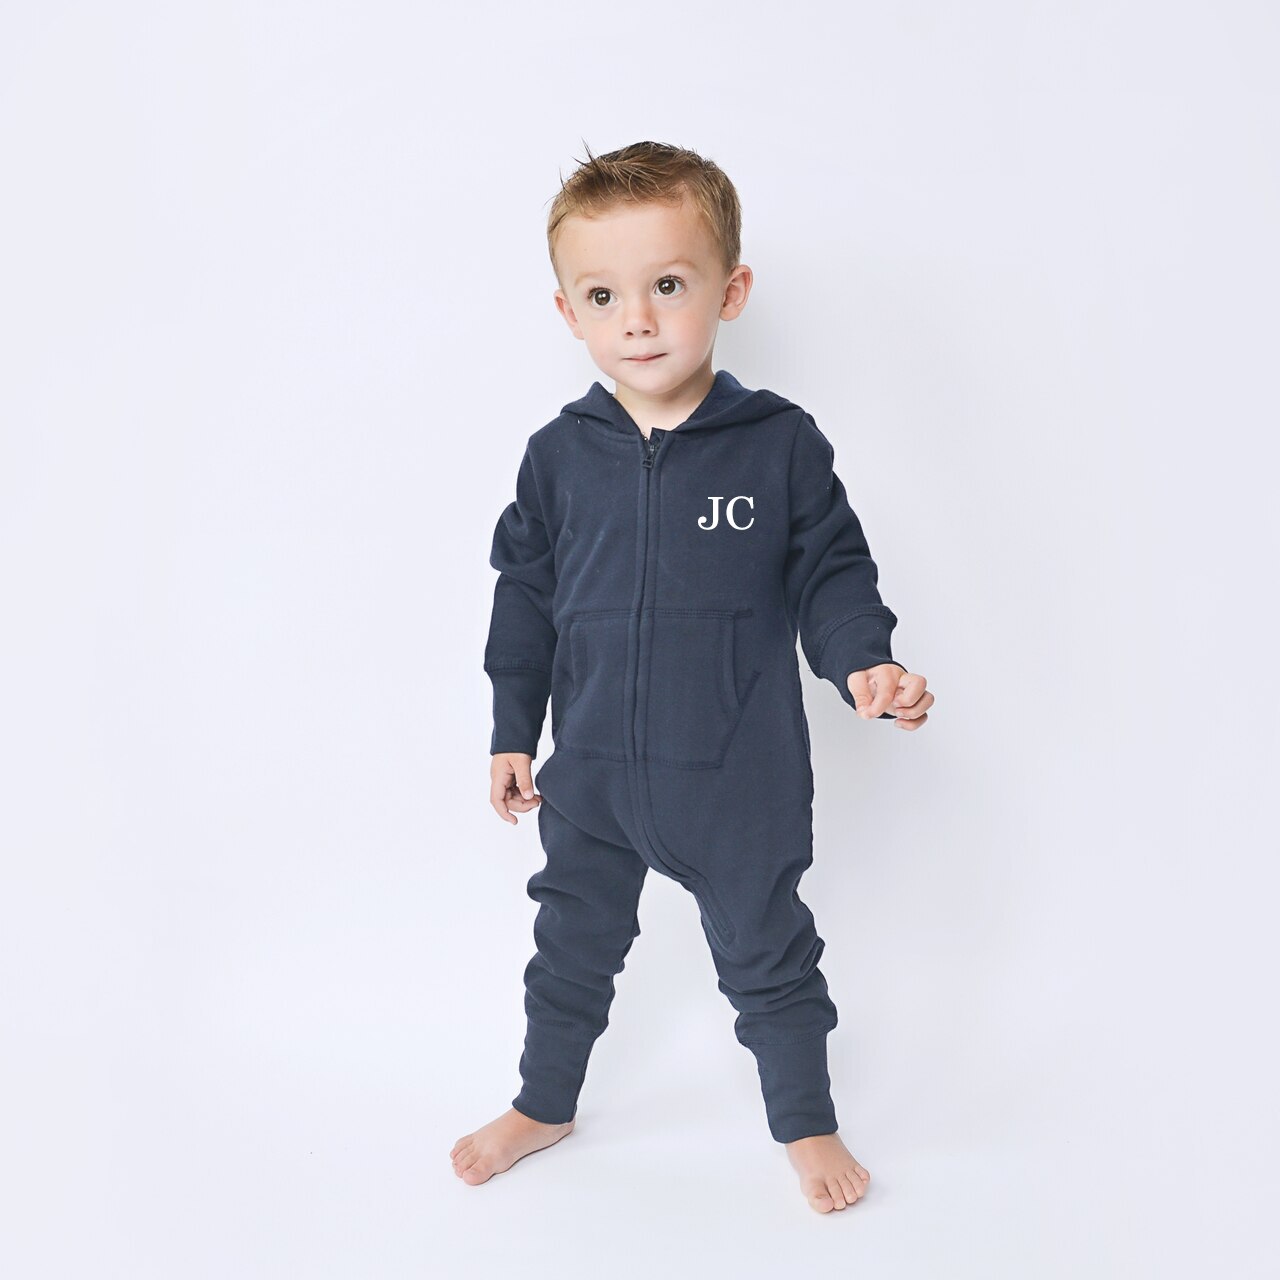 Initial Embroidered Personalised Onesie (Younger Sizes)